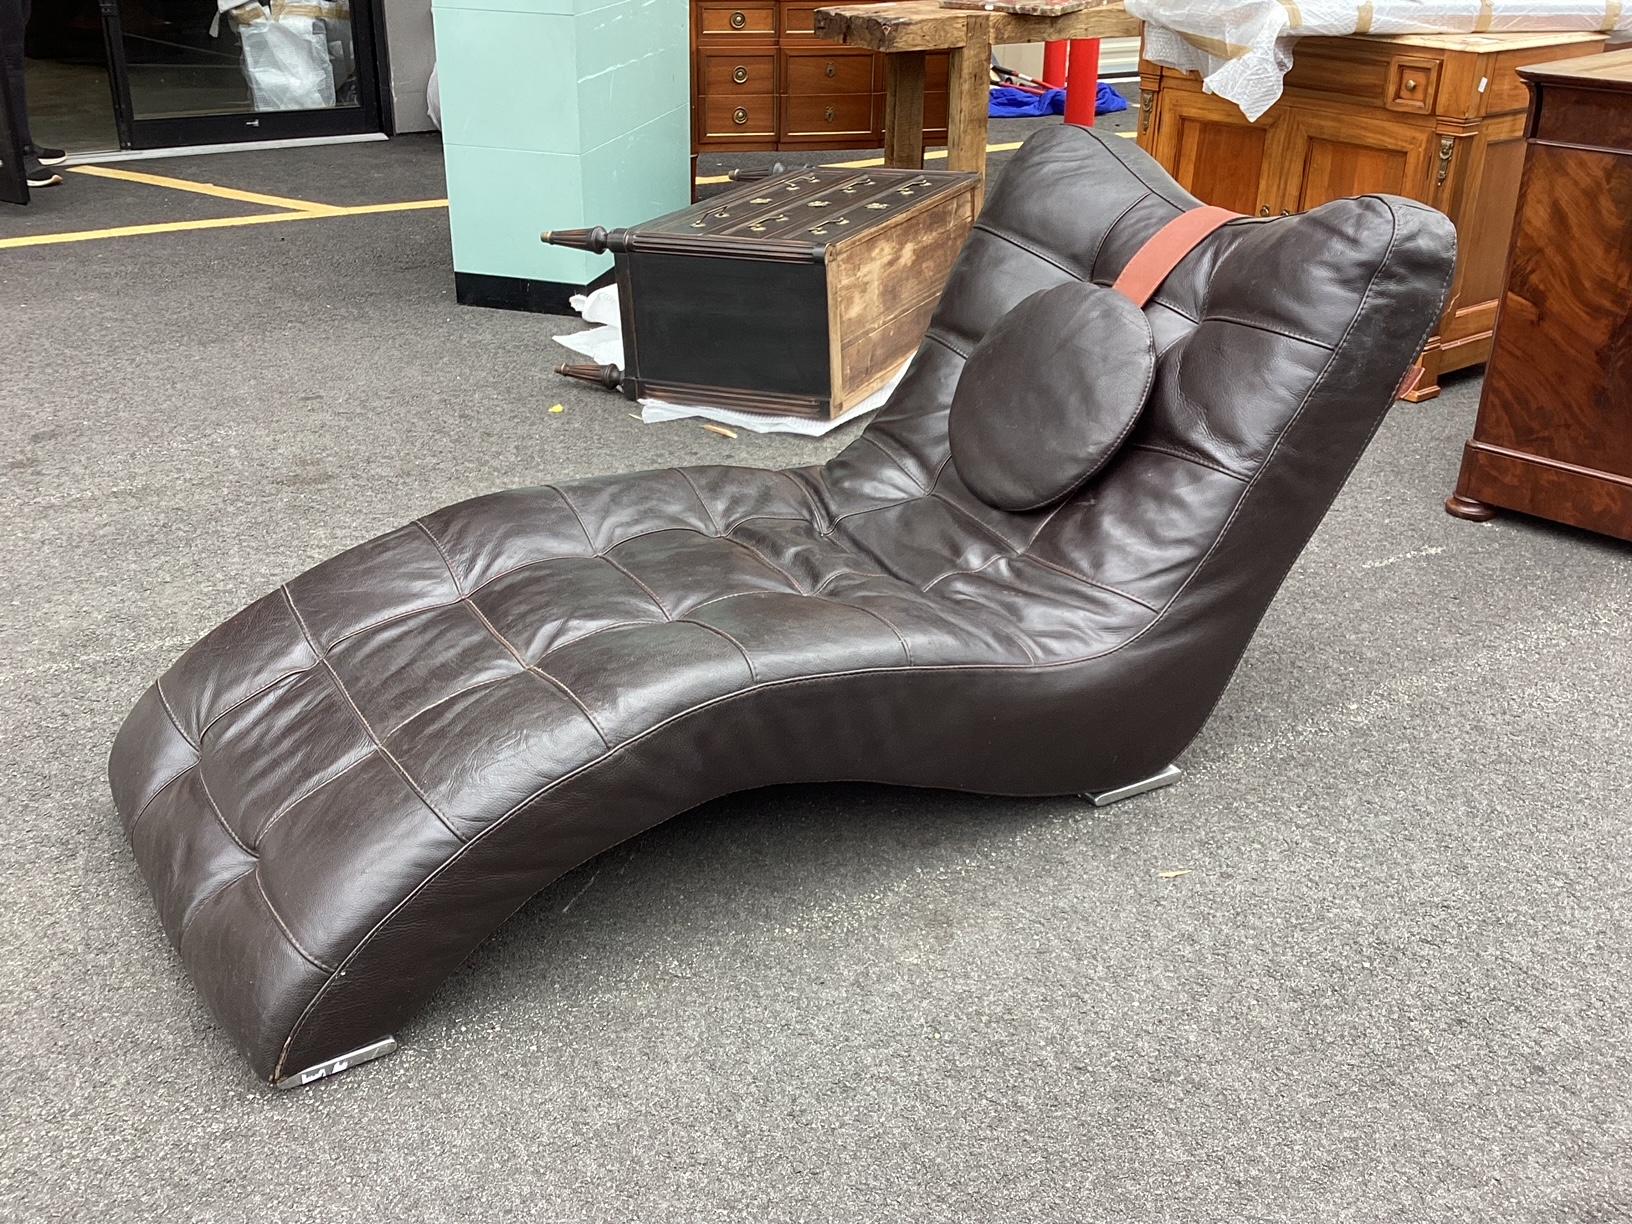 Late 20th Century Sizzling Hot Vintage Italian Leather Chaise Longue For Sale